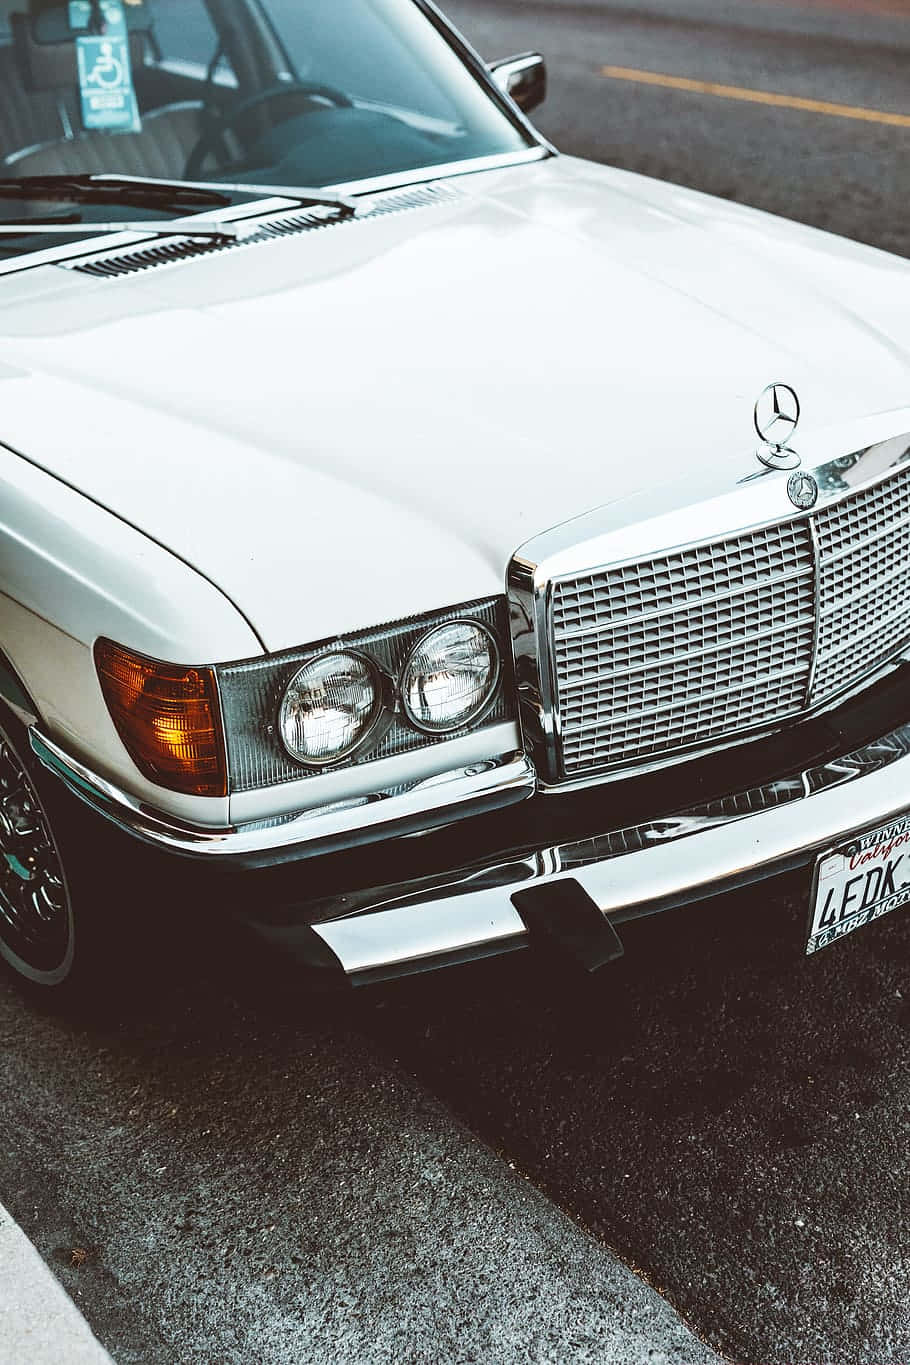 Mercedes White Vintage Classic Iphone Wallpaper